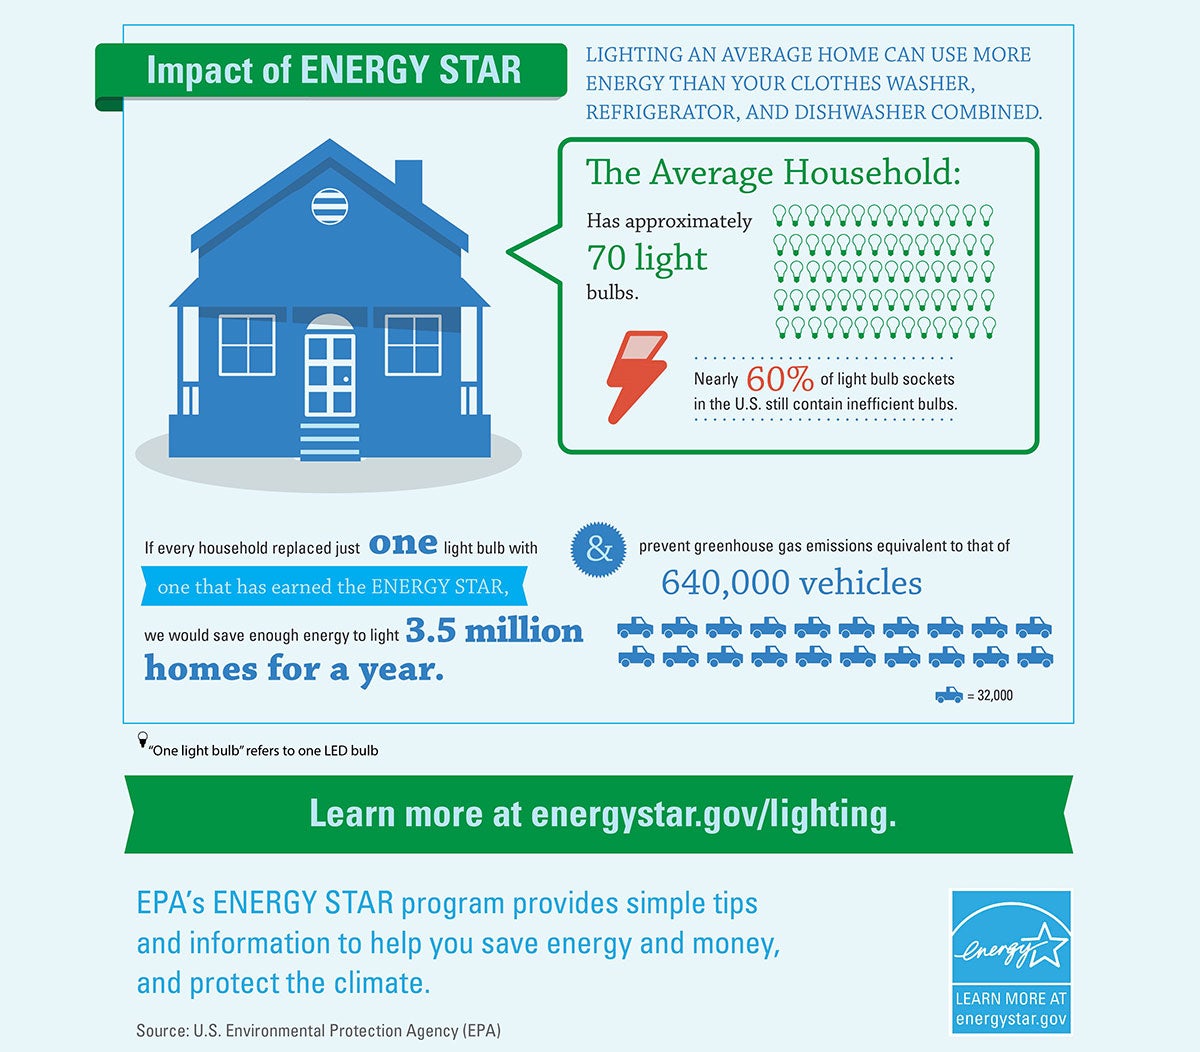 How much energy and money LEDs save compared to incandescent bulbs